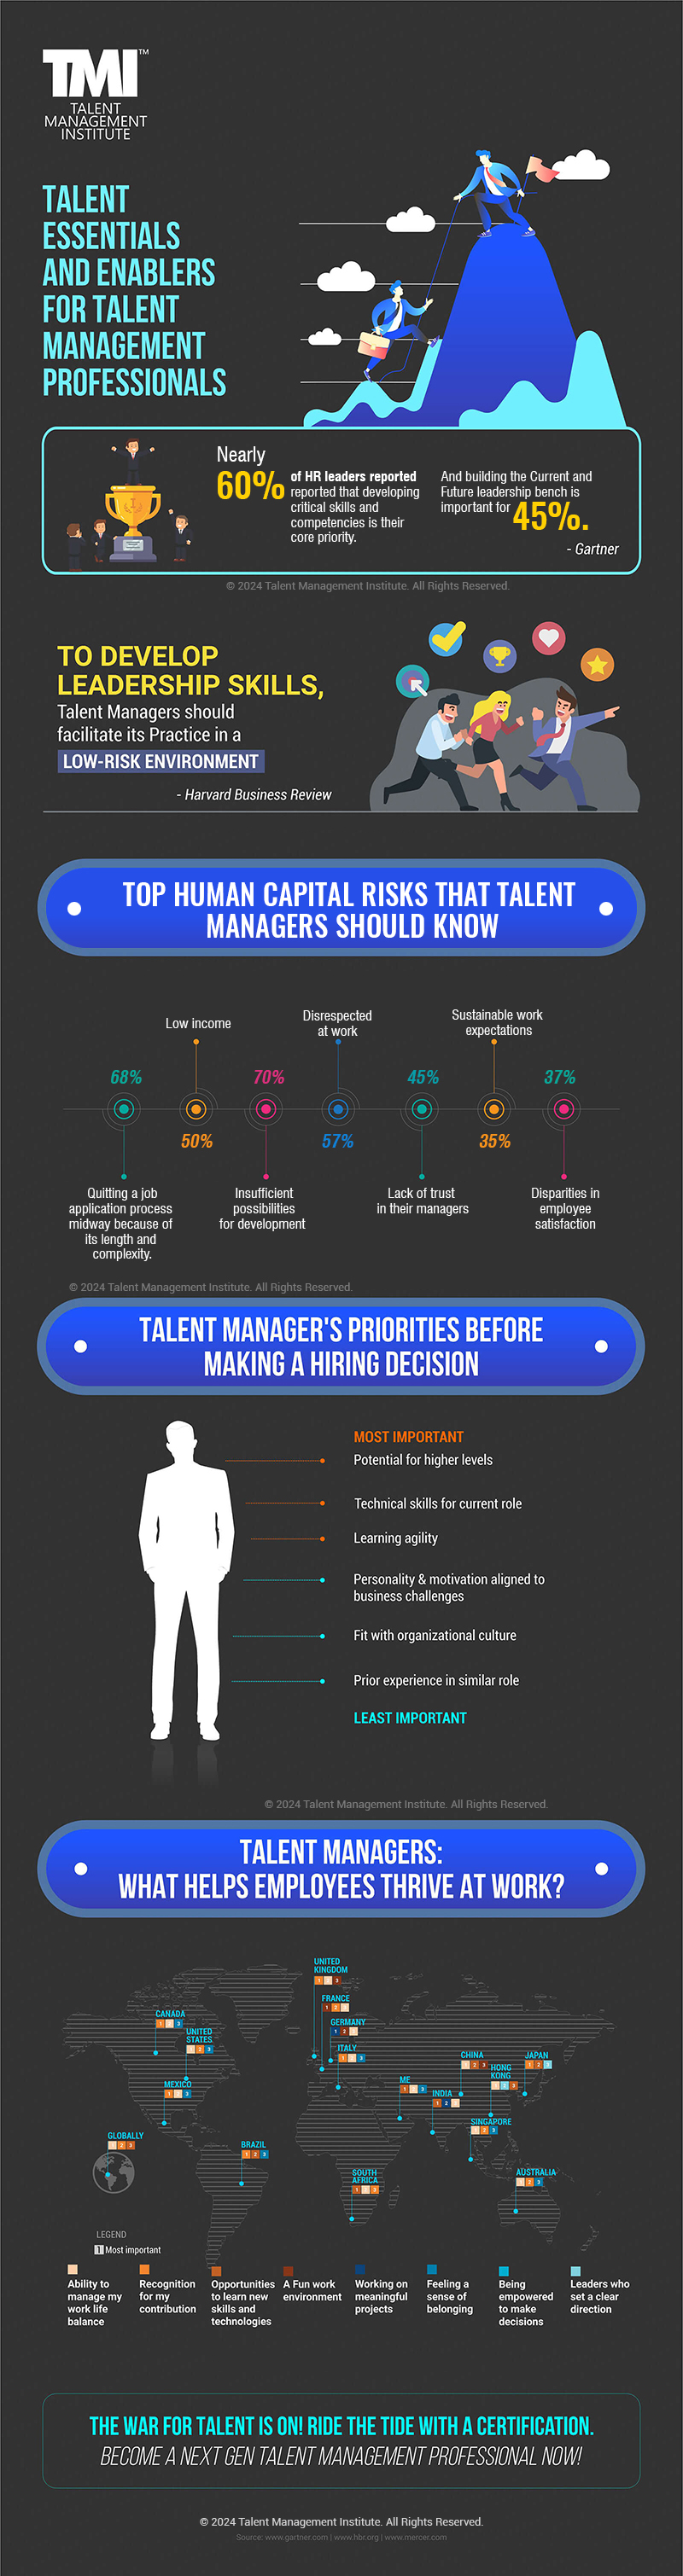 Talent Essentials and Enablers for Talent Management Professionals